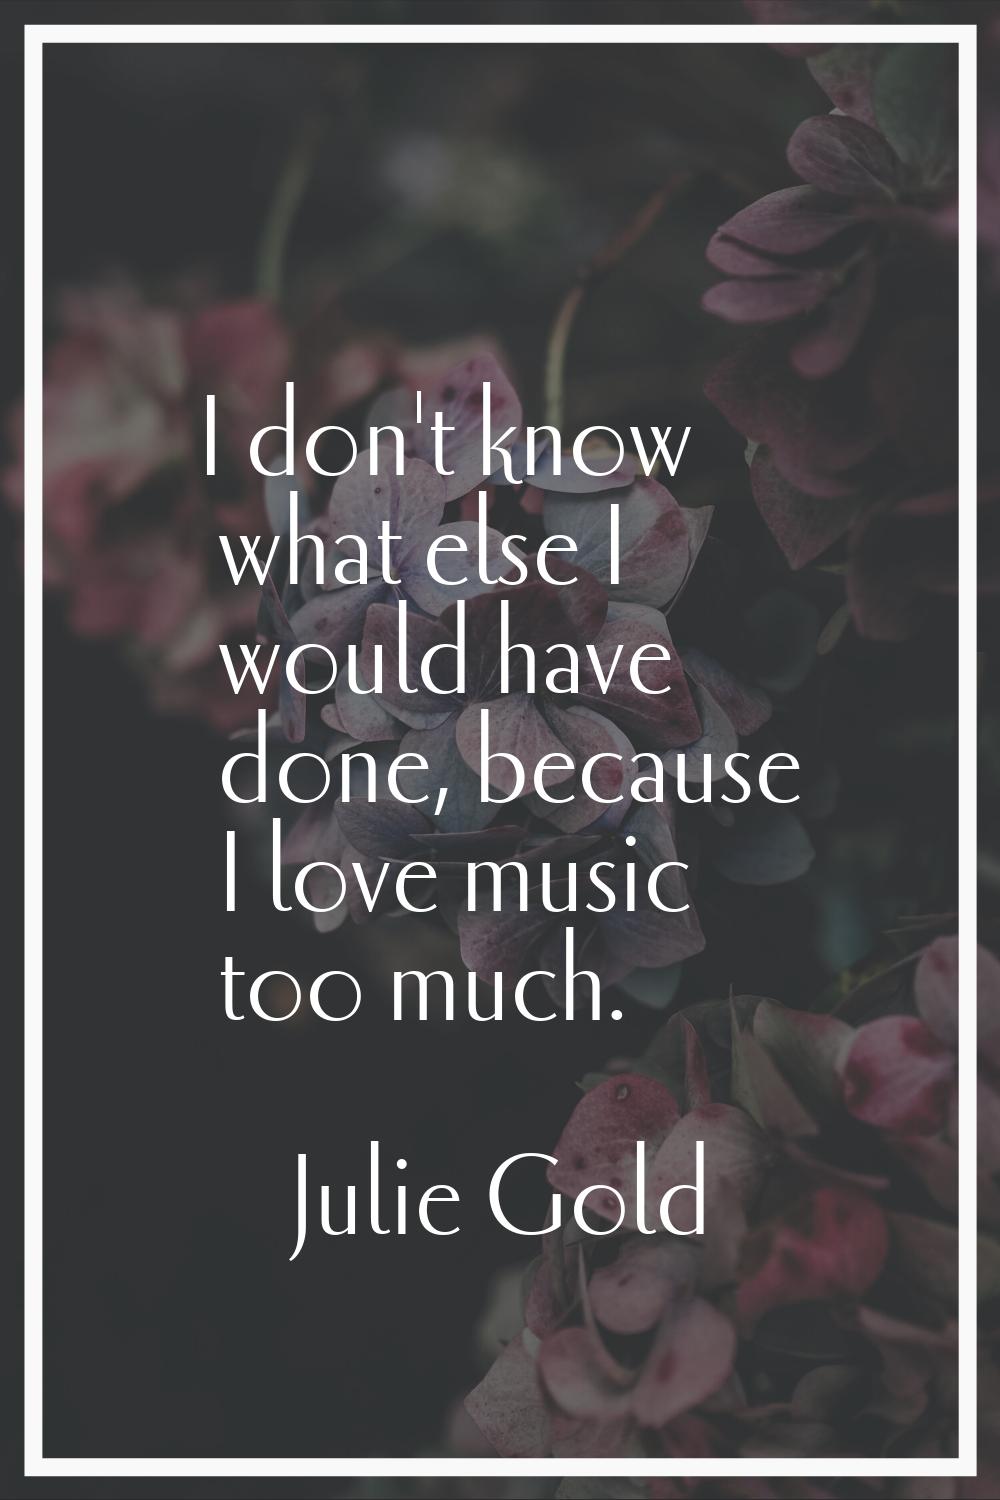 I don't know what else I would have done, because I love music too much.